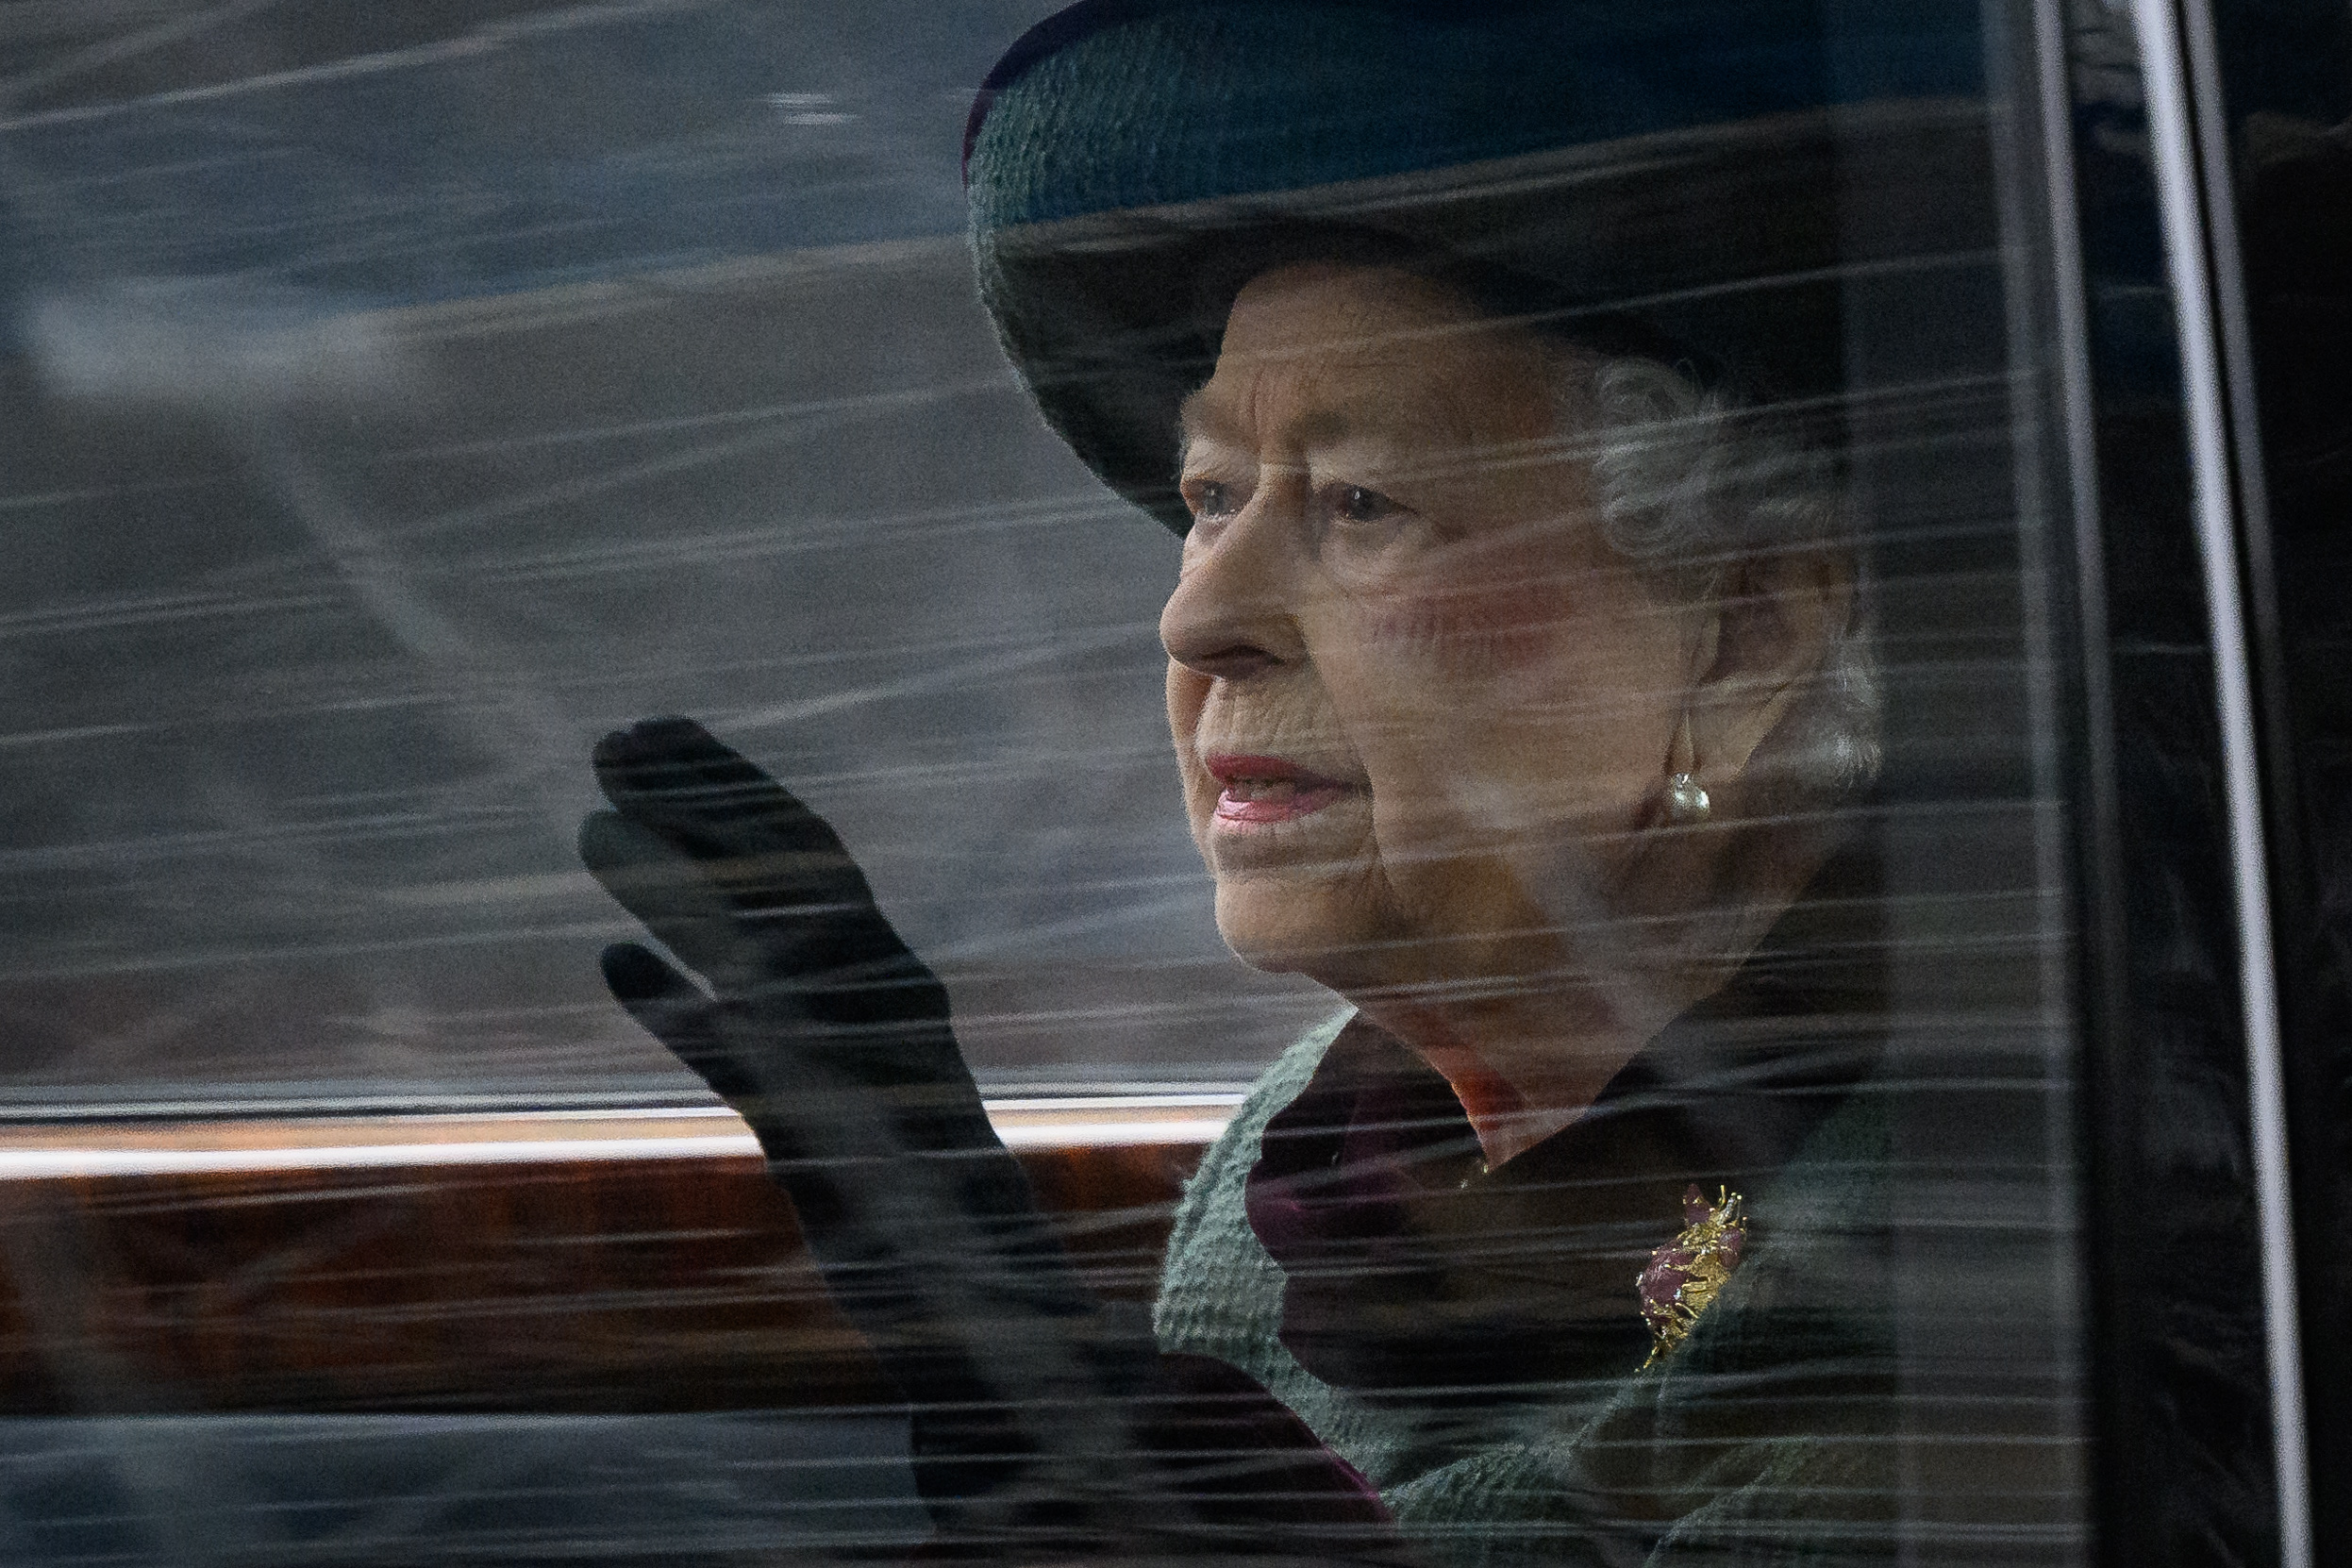 Queen Elizabeth II, who wants to be closer to her late husband on her birthday, waves to crowd as she leaves Prince Philip's memorial service